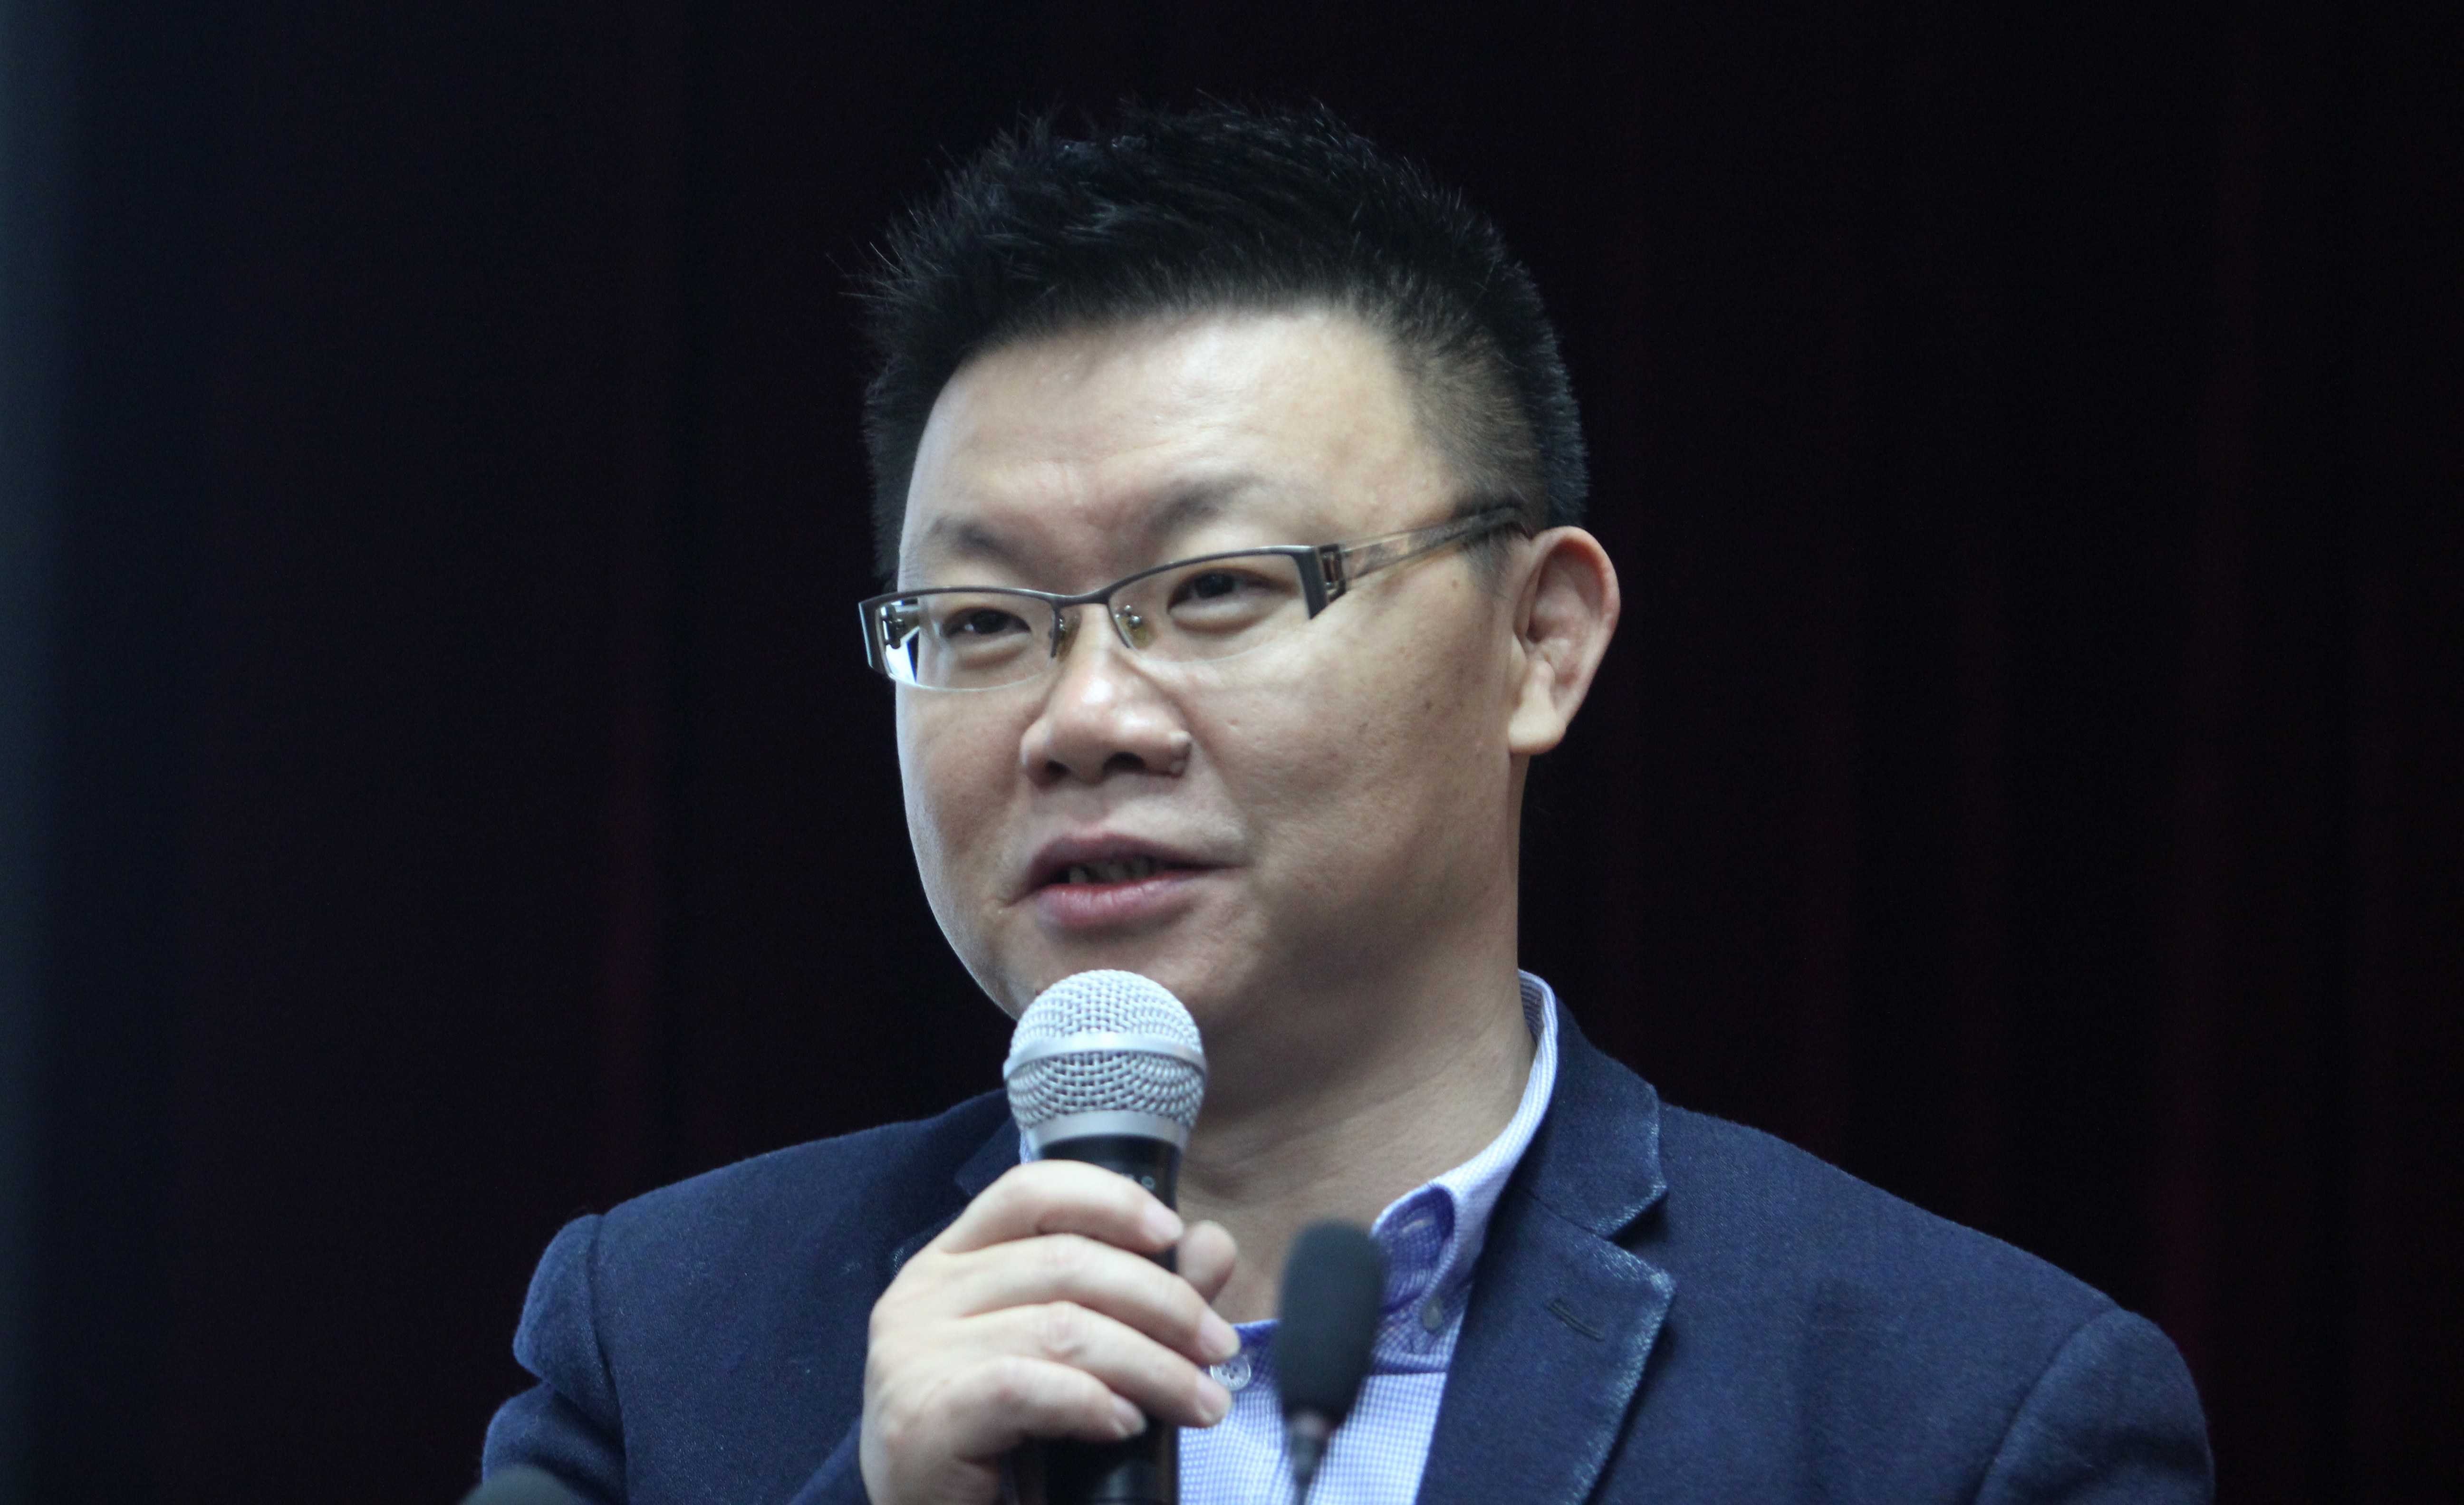 Chinese serial entrepreneur Gong Hongjia, 54, who launched his first company, Chinese radio maker Tecsun, in 1994, has a personal fortune now estimated to be worth US$6.38 billion, according to Bloomberg Billionaires Index.